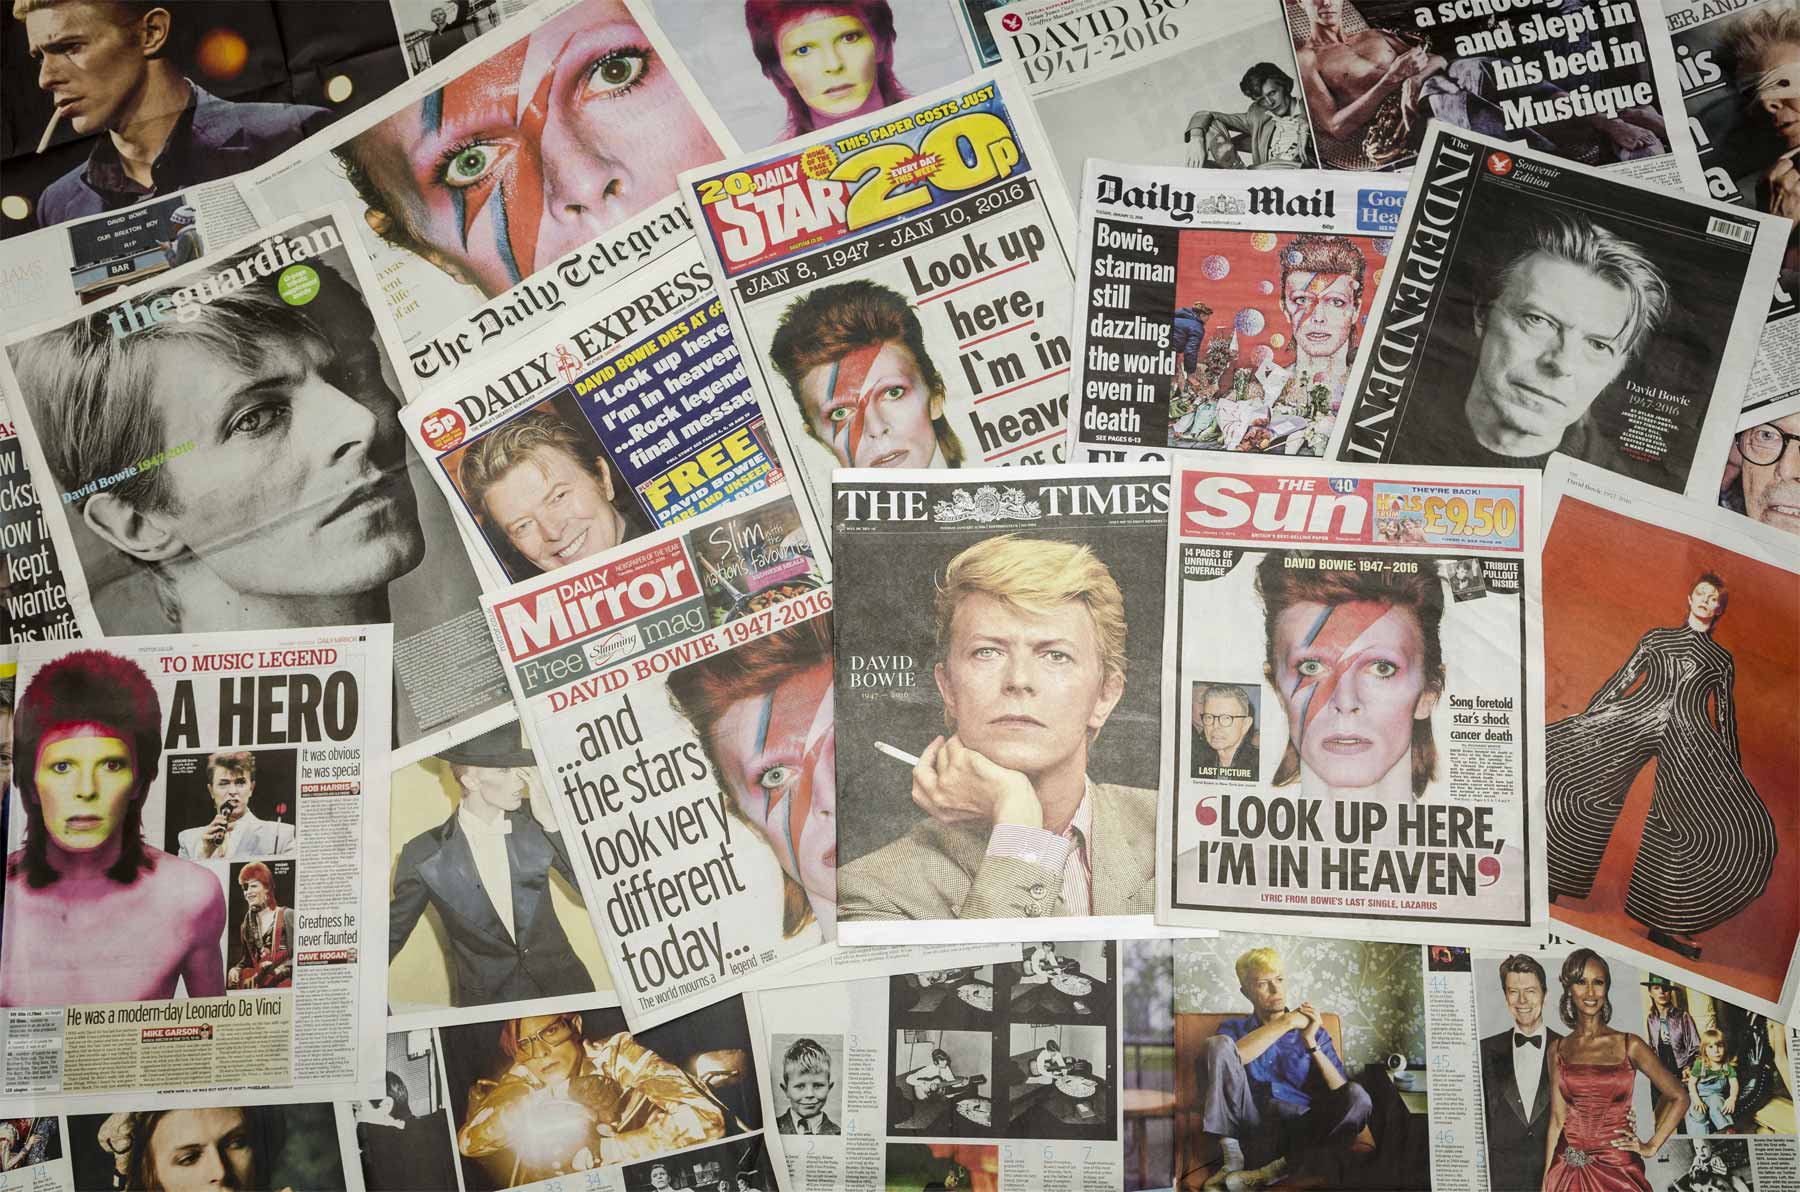 A mess of tabloids featuring David Bowie on the cover.